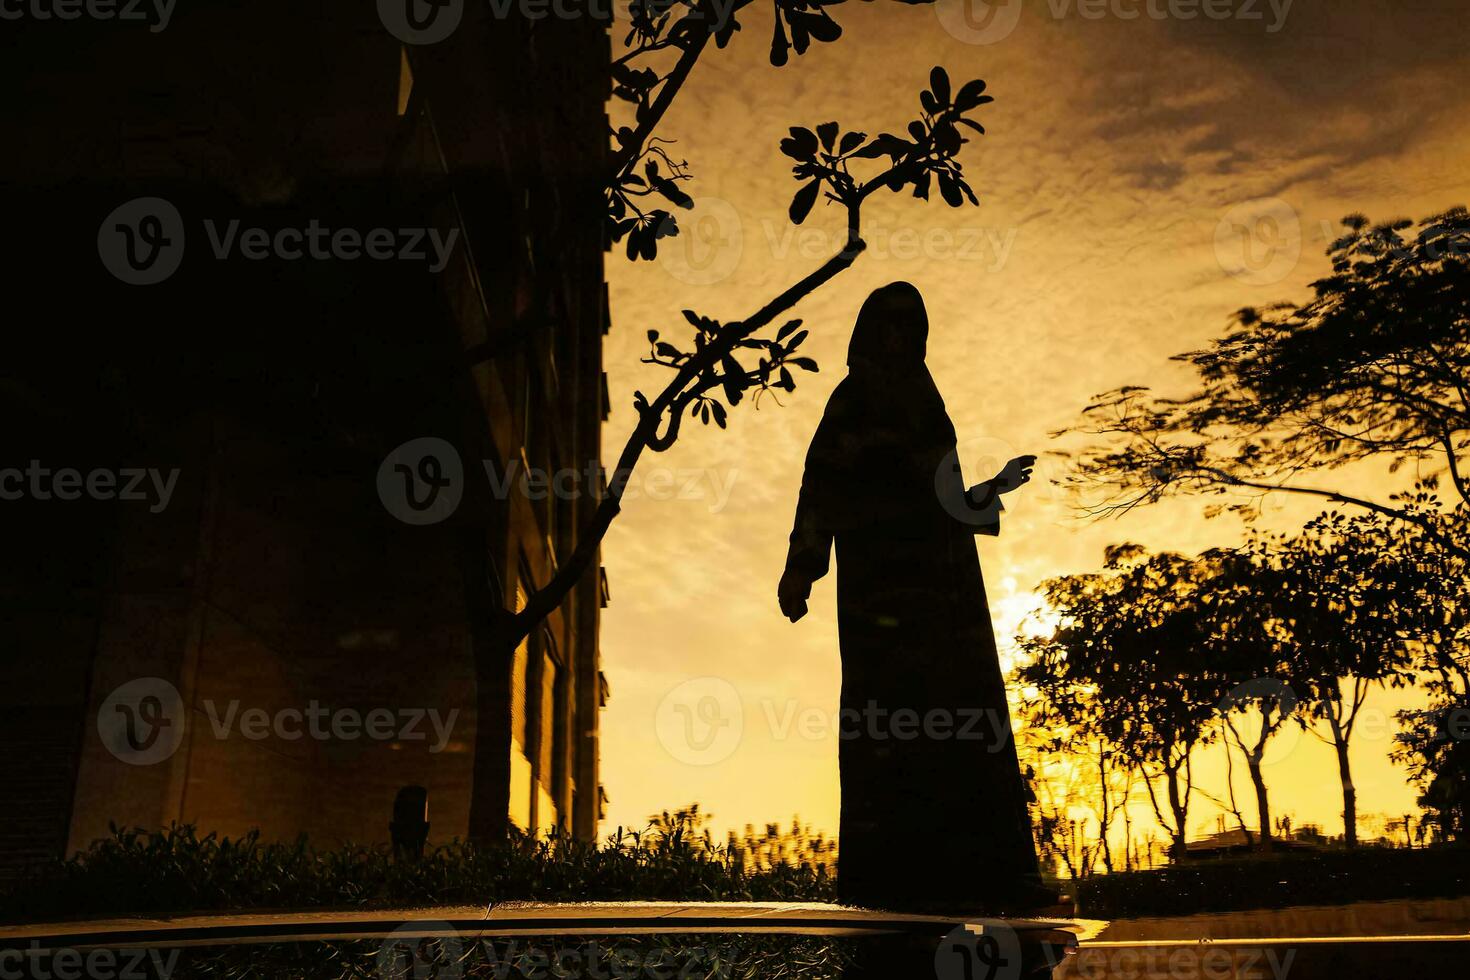 a young woman wearing a hijab and jilbab standing holding a phone near a water body at dusk photo